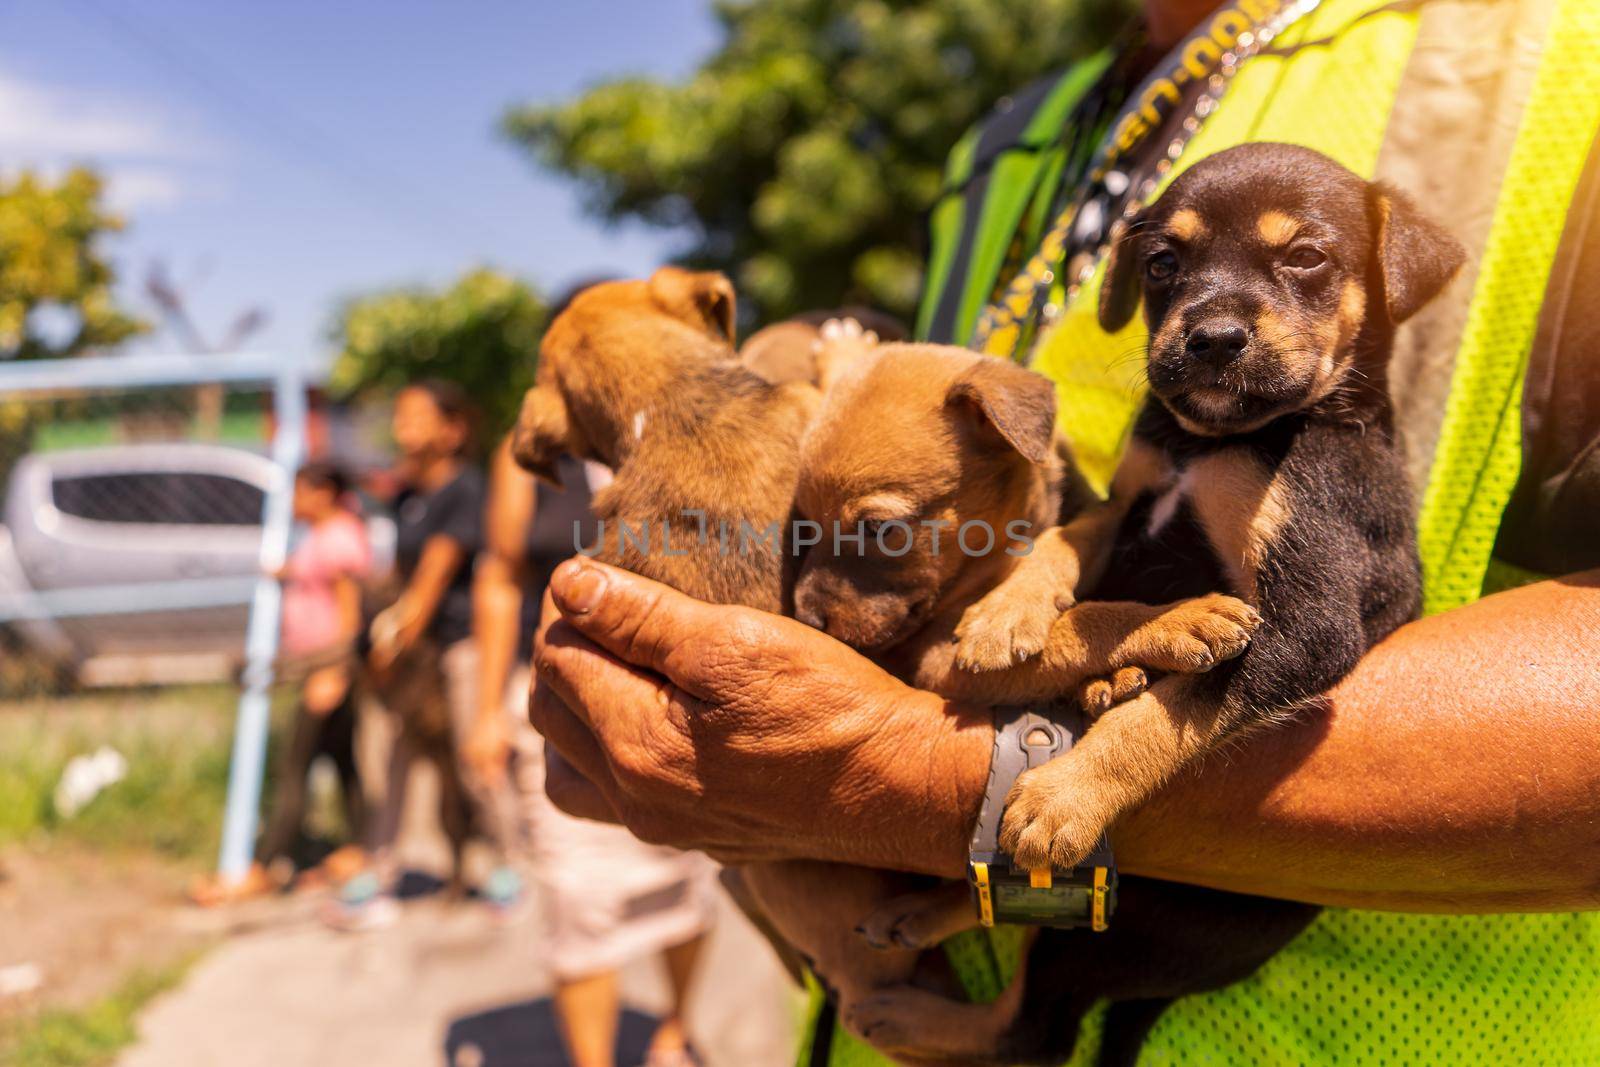 Latino Man in a vest holding a group of dog puppies in his arms in latin america